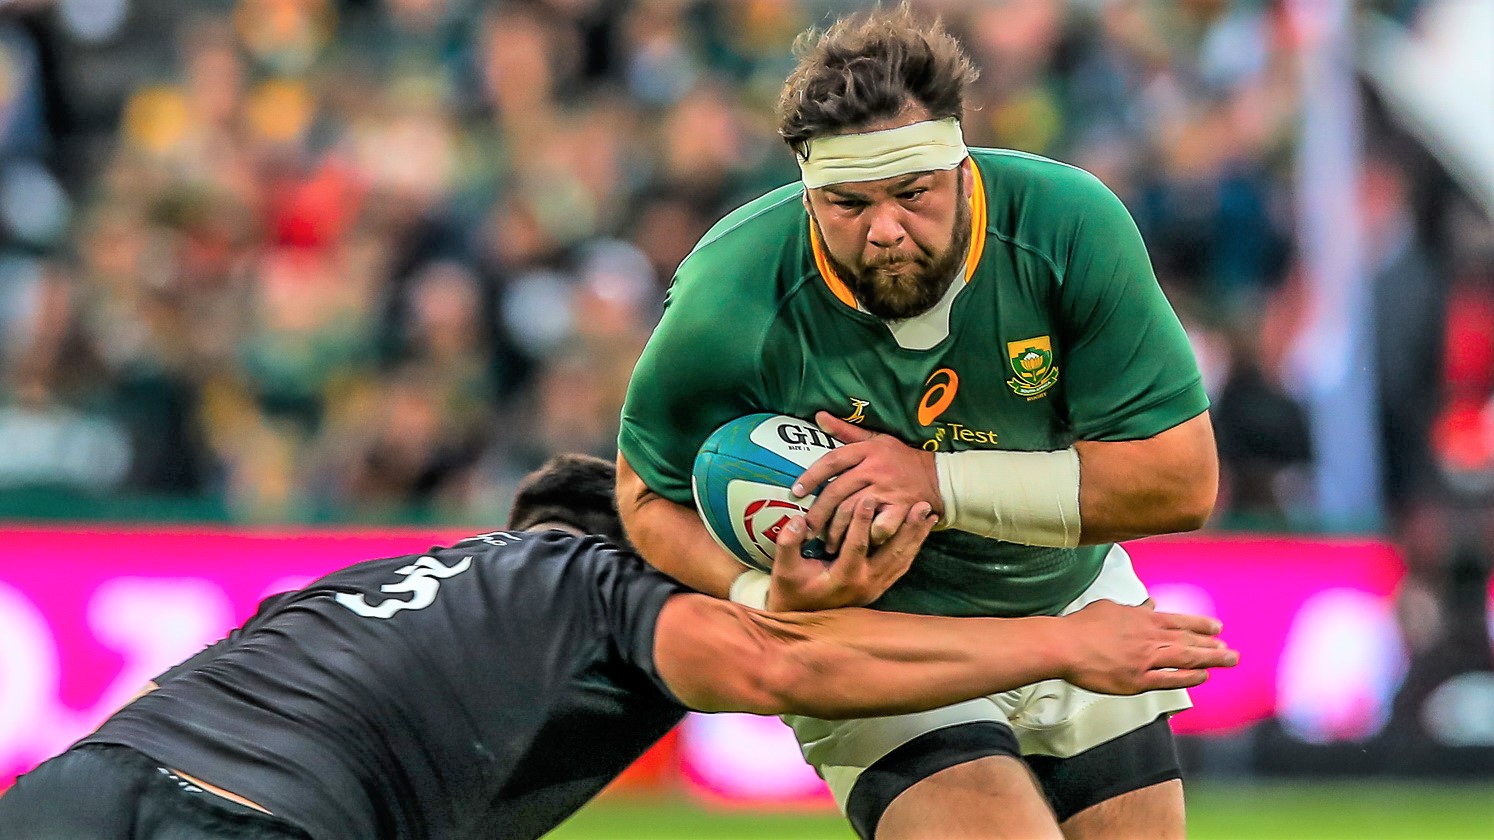 JOHANNESBURG, SOUTH AFRICA - AUGUST 13: Frans Malherbe of the Springboks attacking during The Rugby Championship match between South Africa and New Zealand at Emirates Airline Park on August 13, 2022 in Johannesburg, South Africa. (Photo by Gordon Arons/Gallo Images)